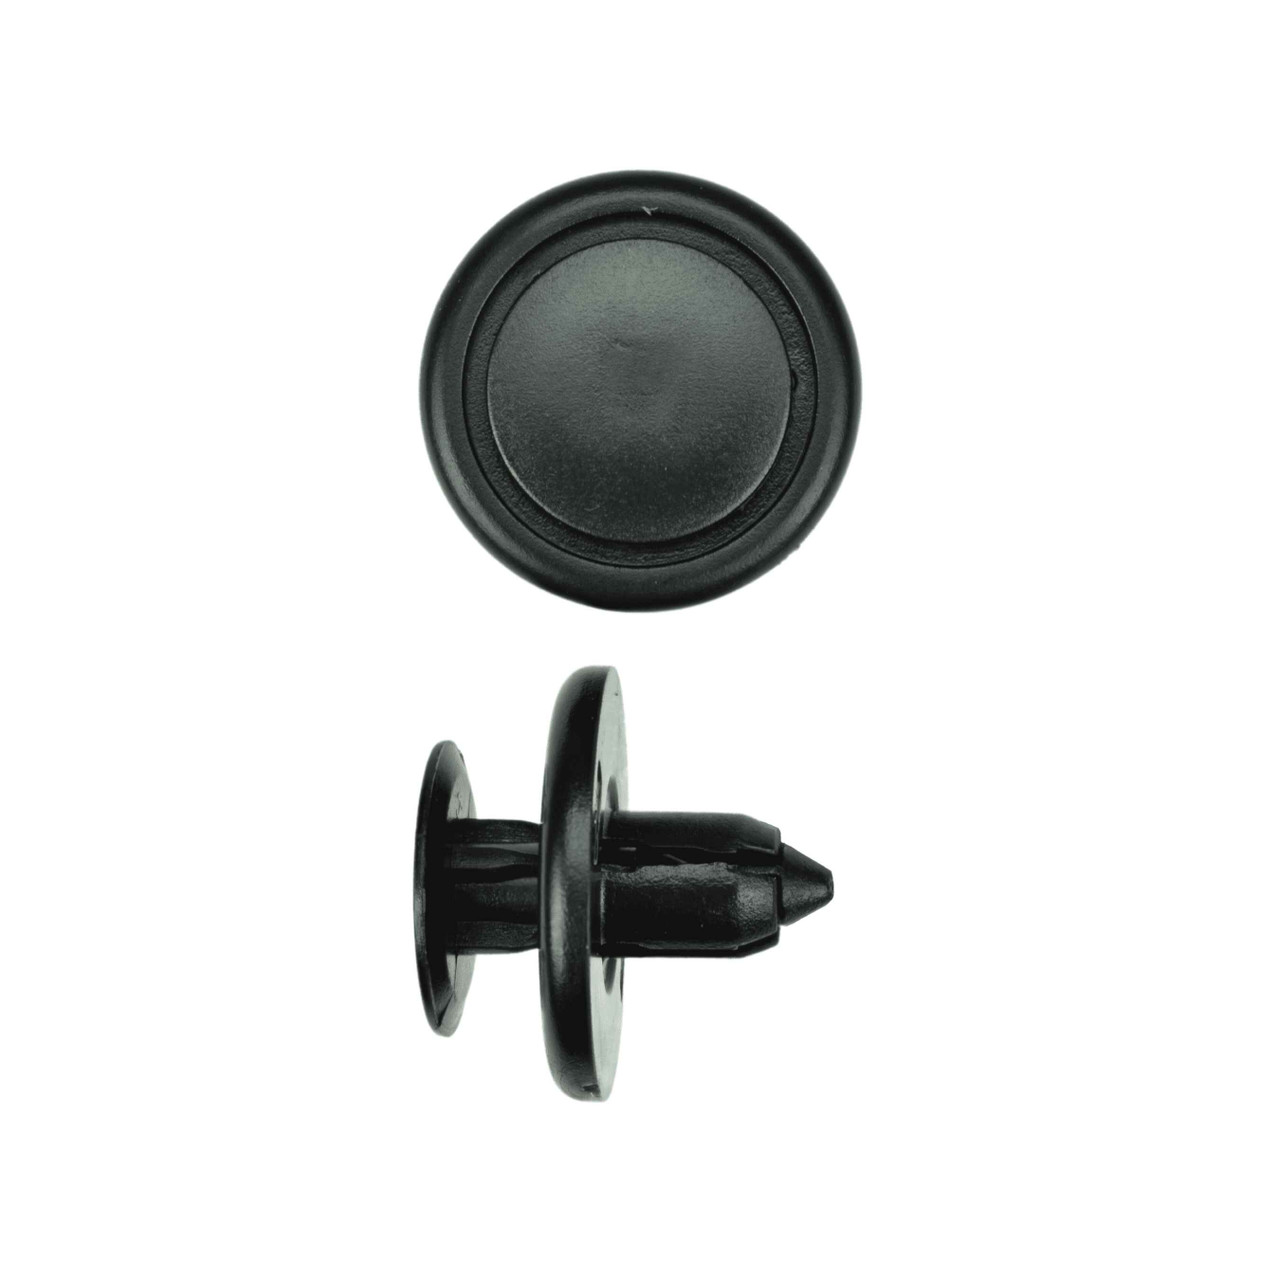 Toyota Push Trim Retainer Clips - Fits 7mm Hole